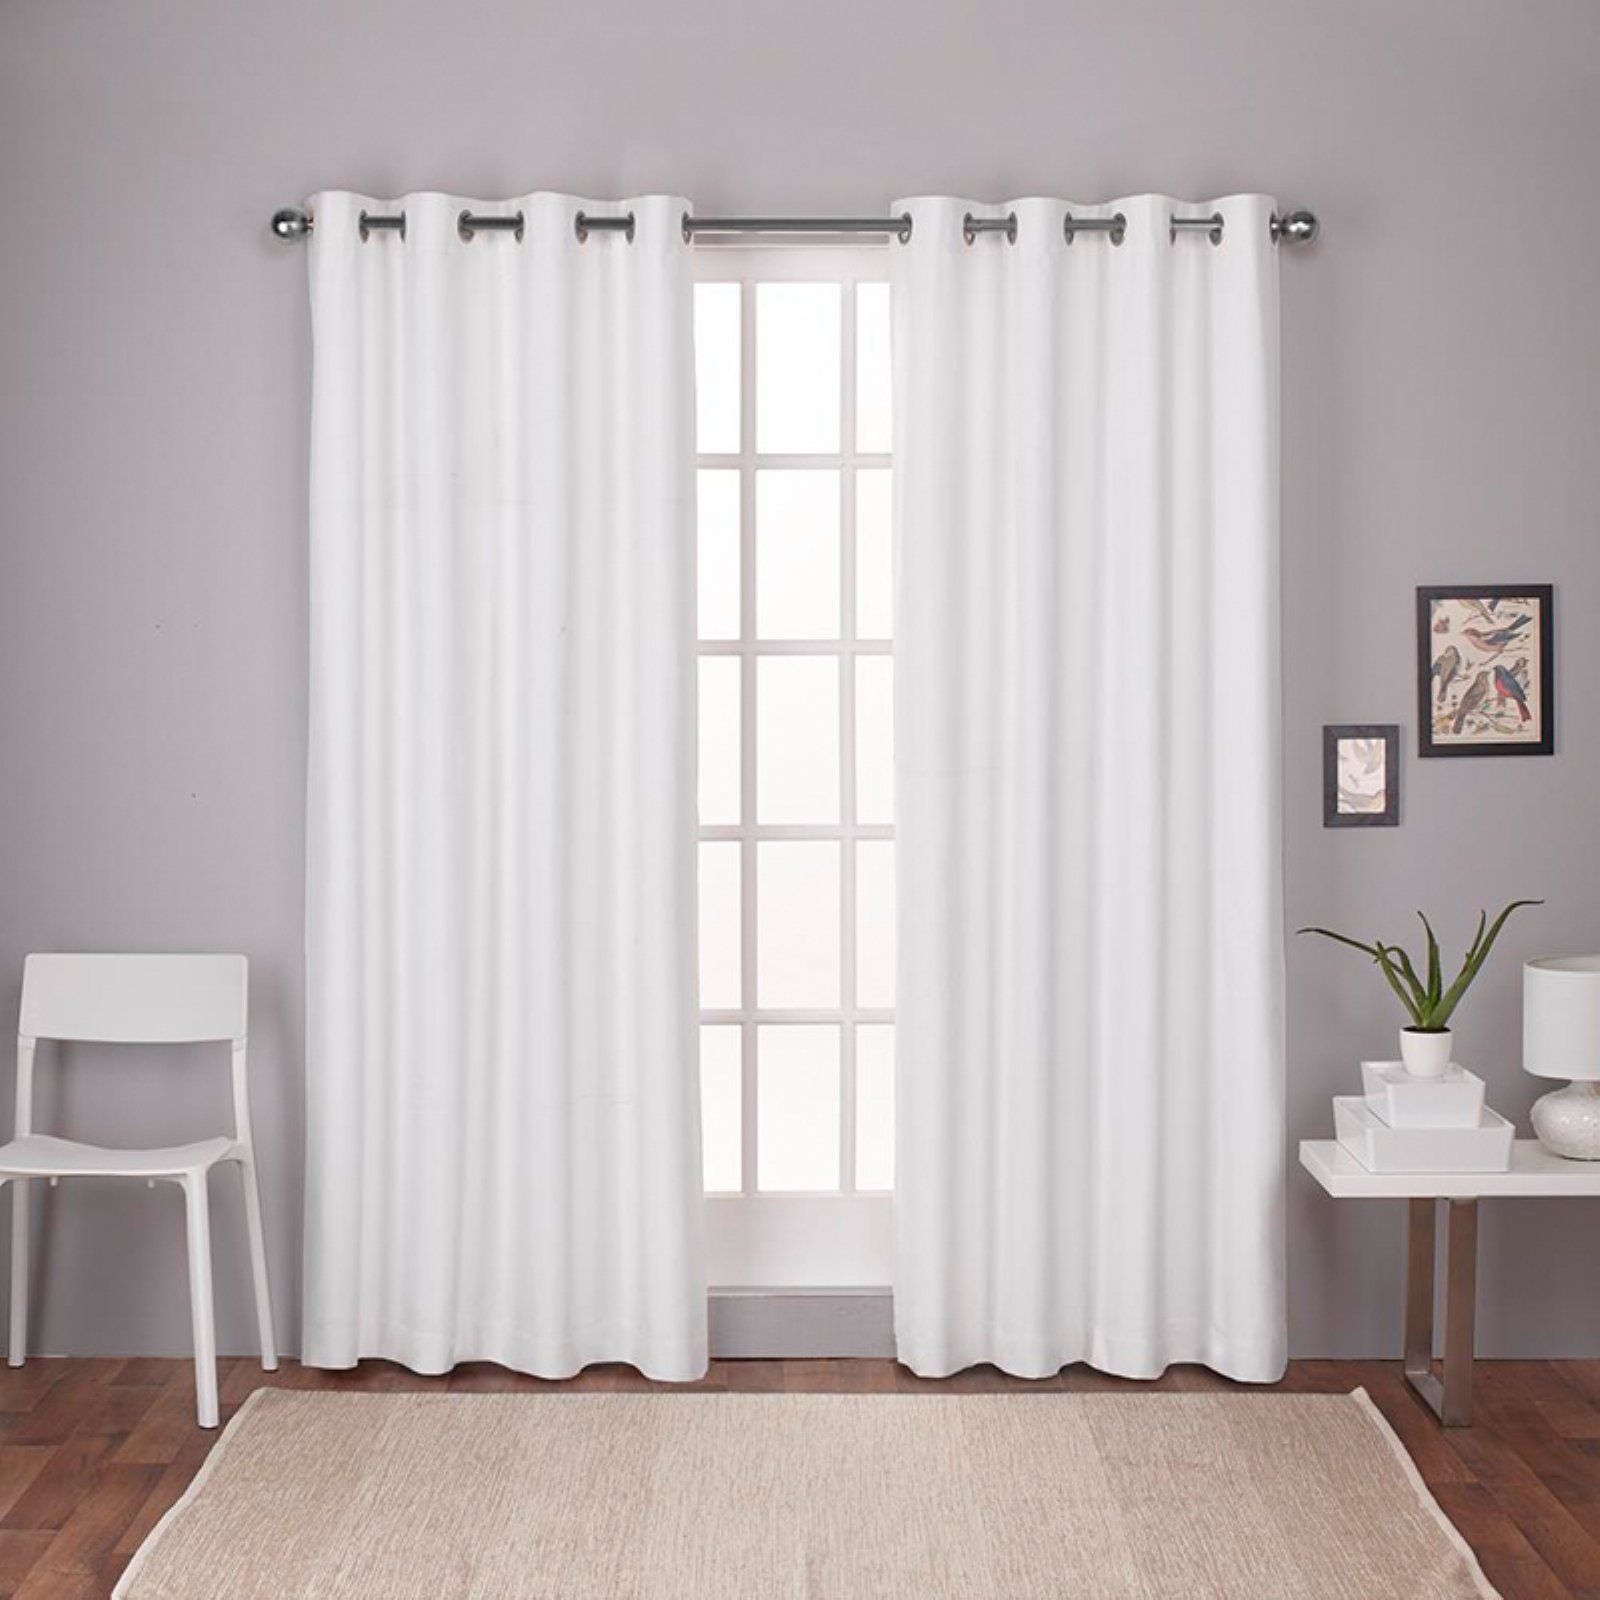 Exclusive Home Curtains 2 Pack London Textured Linen Thermal Grommet Top  Curtain Panels Pertaining To Thermal Textured Linen Grommet Top Curtain Panel Pairs (View 1 of 30)